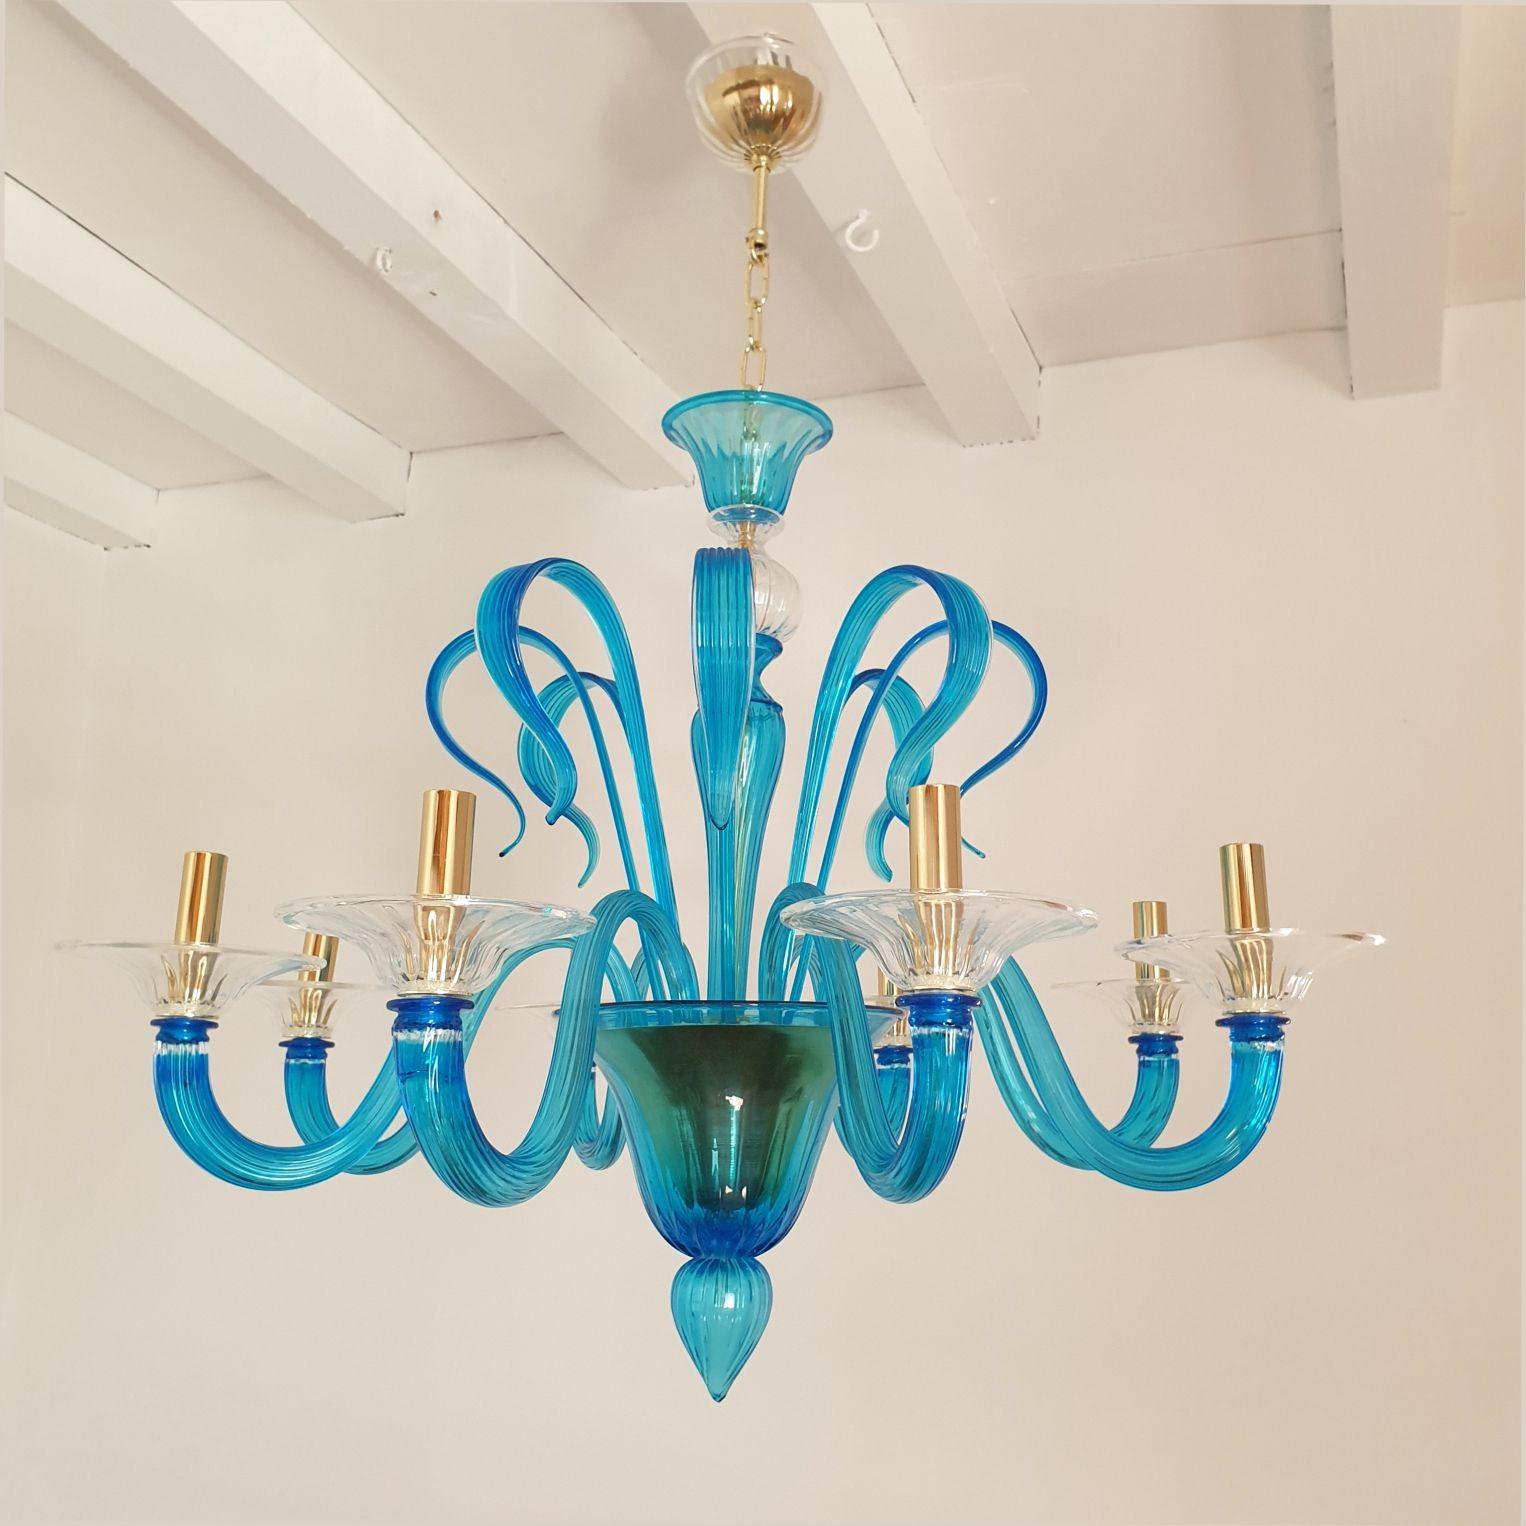 Mid Century Modern large sky blue & clear Murano glass chandelier, attributed to Venini, Italy 1980s
The large chandelier has 8 lights/arms and gold plated & brass mounts.
The Mediterranean blue color makes it very Arty, decorative lighting